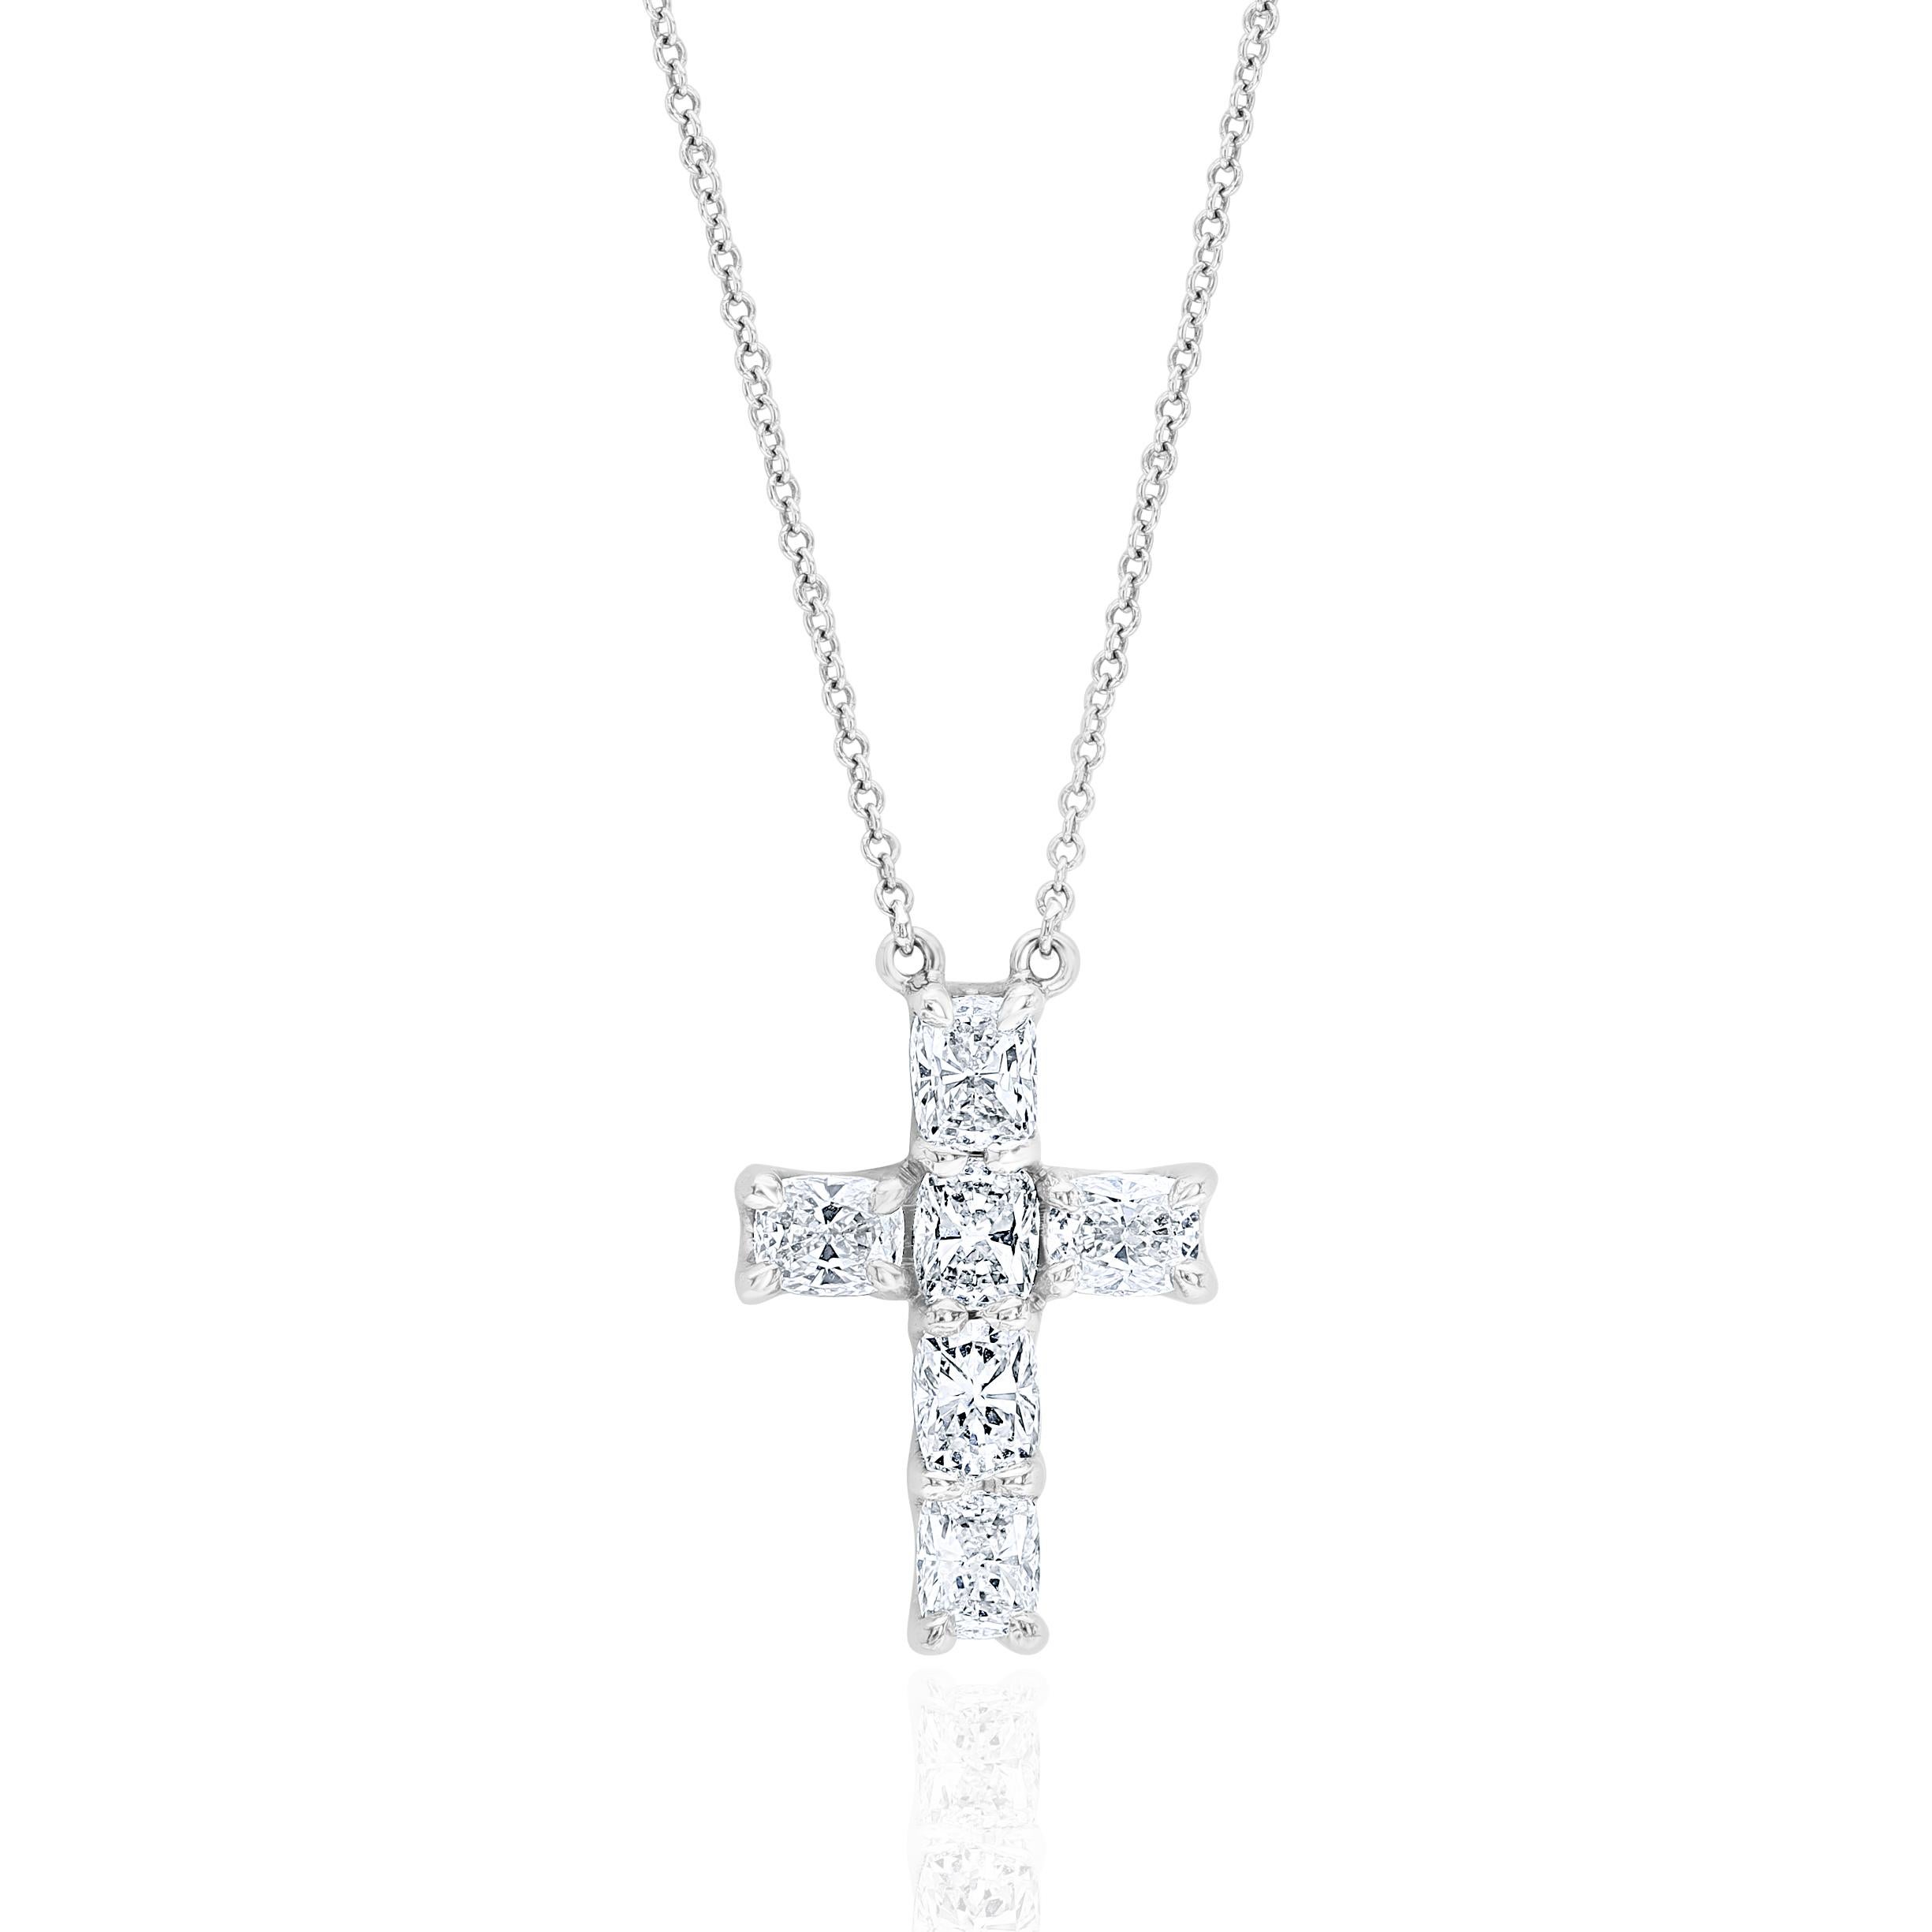 6 elongated Cushion Cut Diamonds make up this beautiful and understated cross. Stones weighing approximately 0.30 carat each for a total of 1.80 Carats.
Stones are G-H color and VS Clarity.
Set in 18 Karat White Gold.